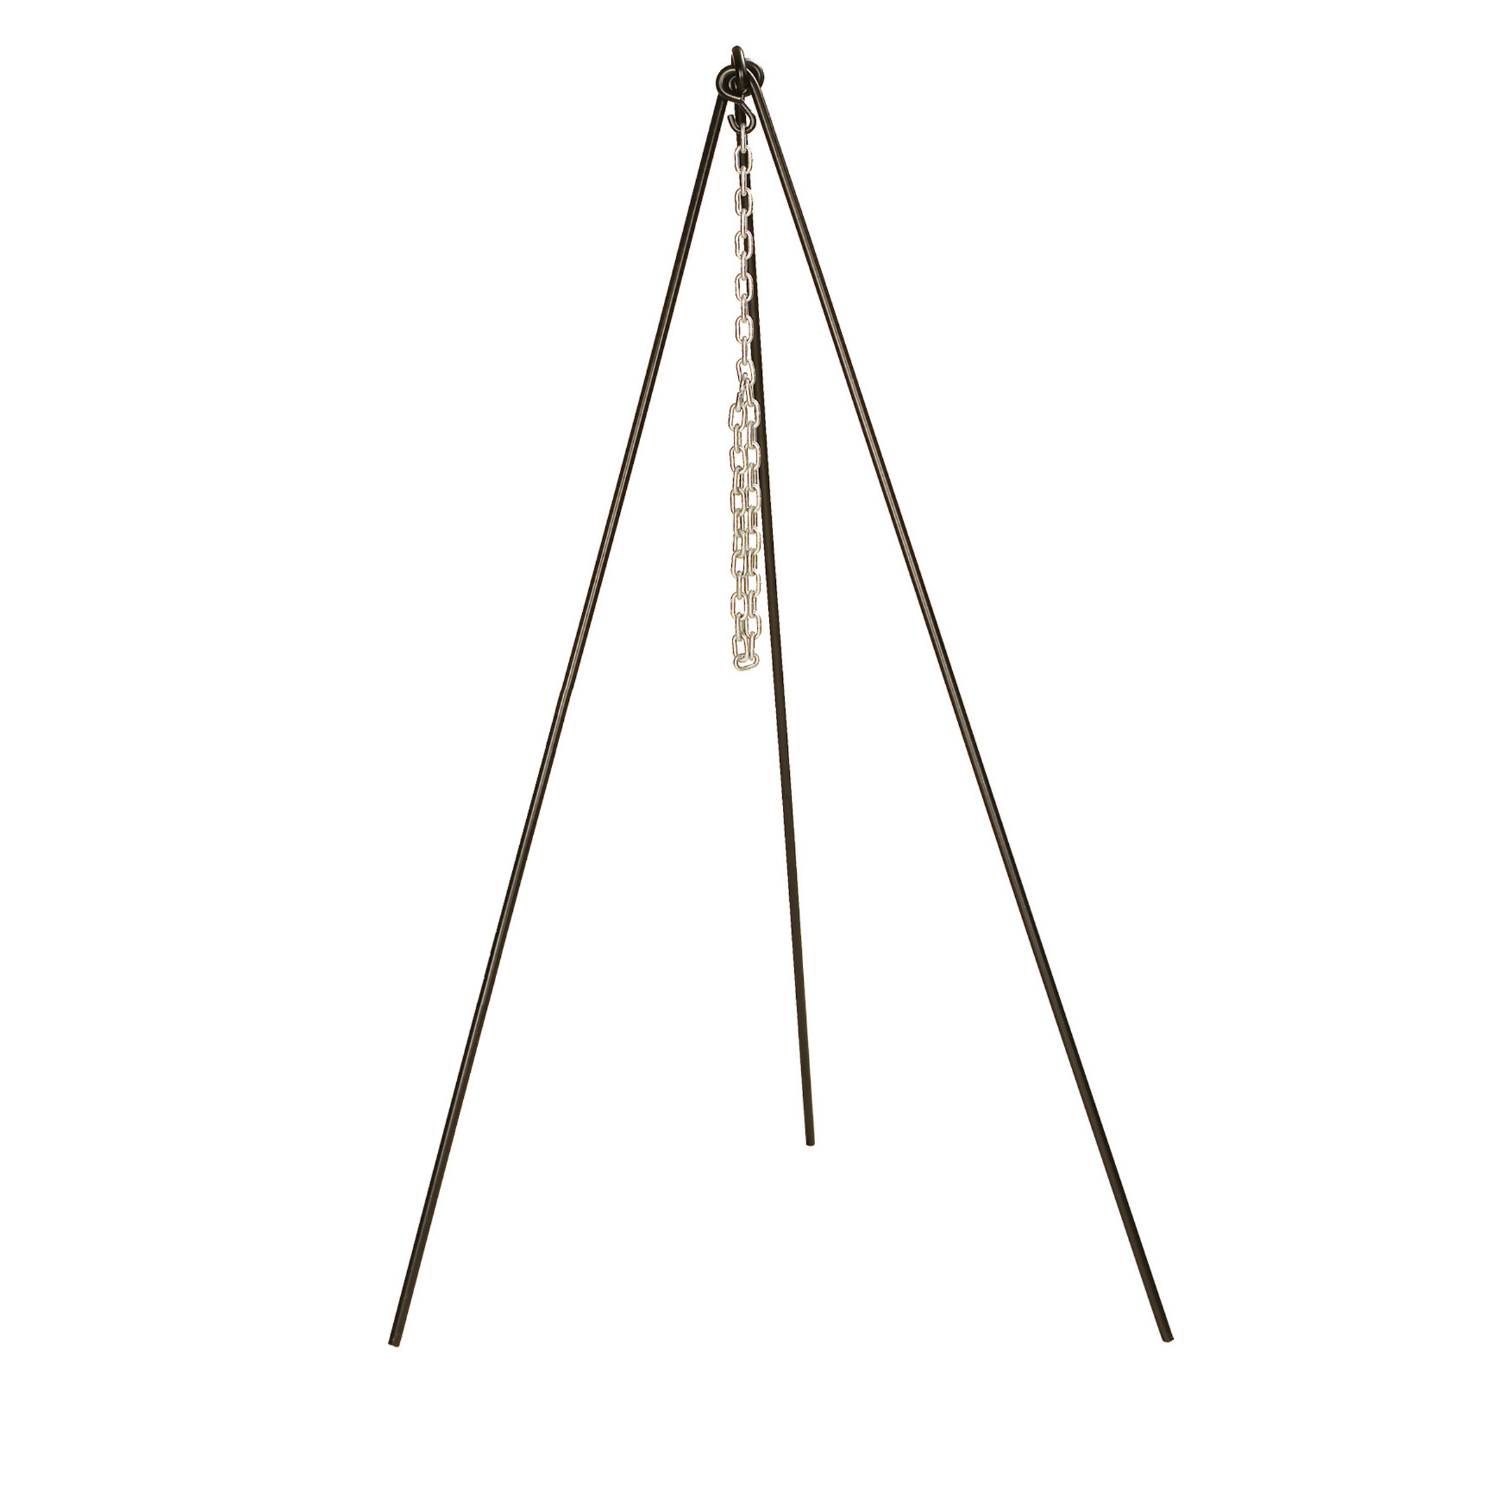 Camp Chef Dutch Oven 50 Tripod, Steel Chain for Hanging Cookware, TRIPOD50